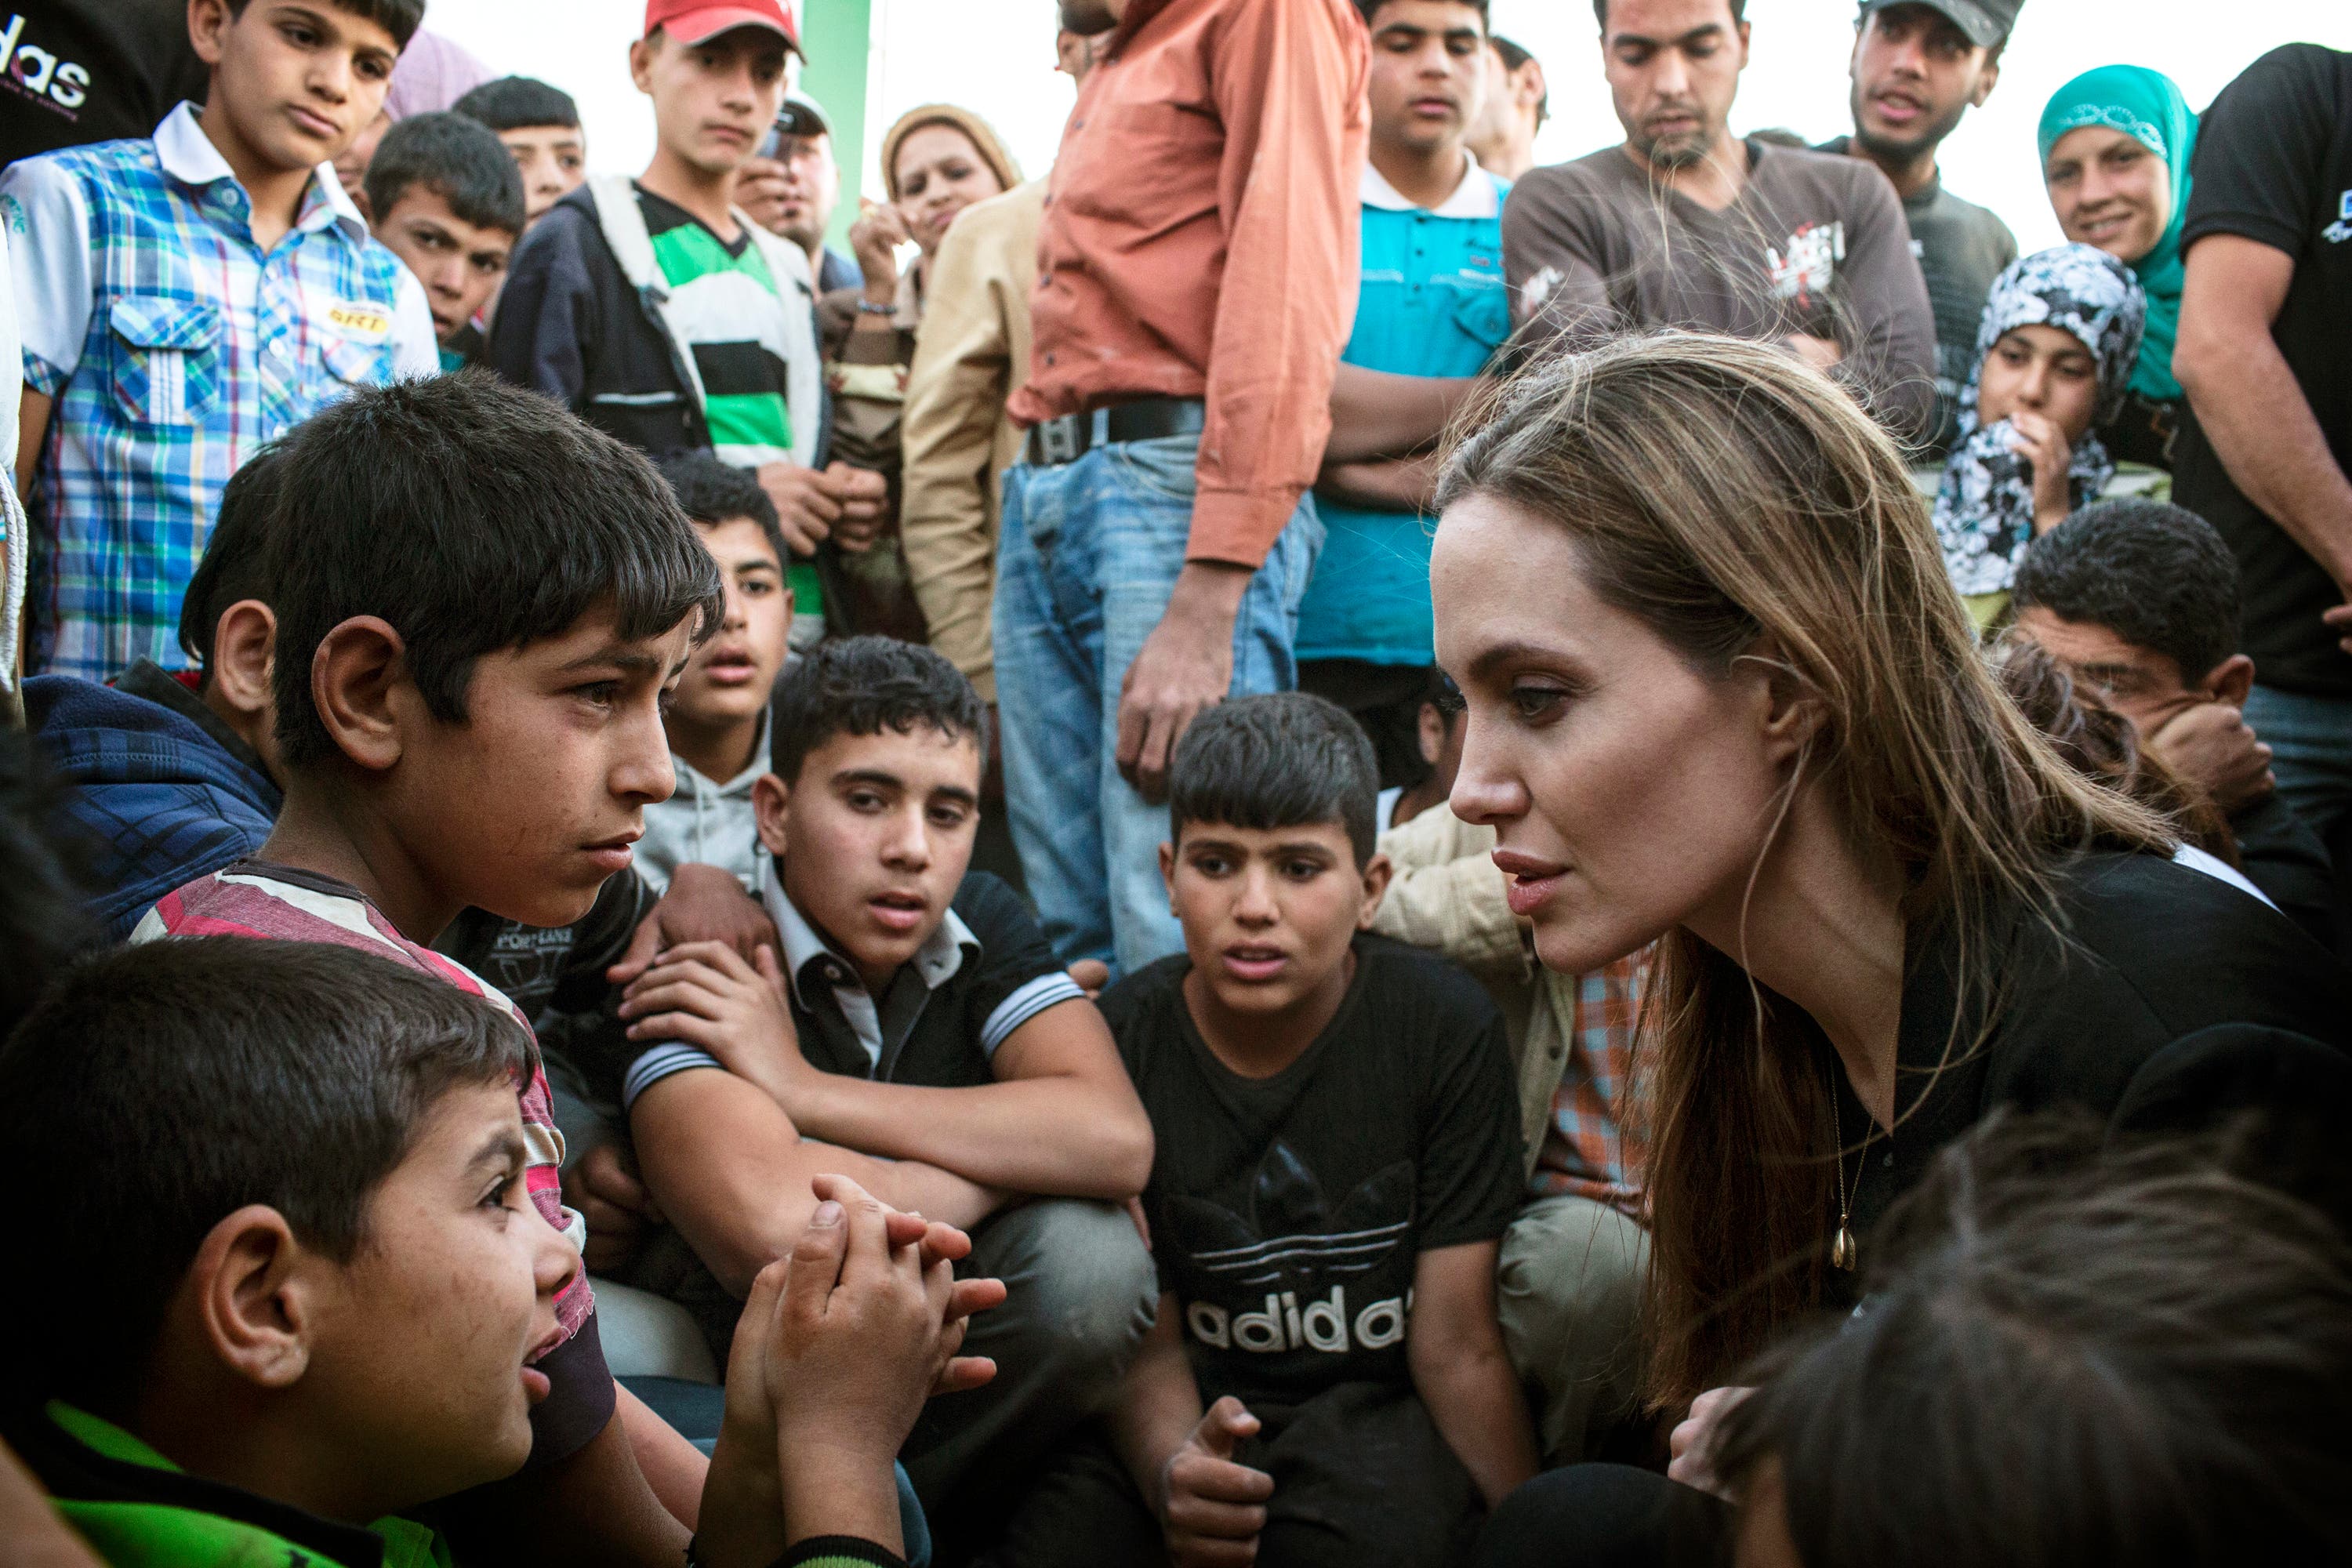 Photo released by the UNHCR shows special envoy Angelina Jolie, right, speaking with Syrian refugees in a Jordanian military camp based near the Syria-Jordan border on June 18, 2013. (Photo courtesy: AP) 